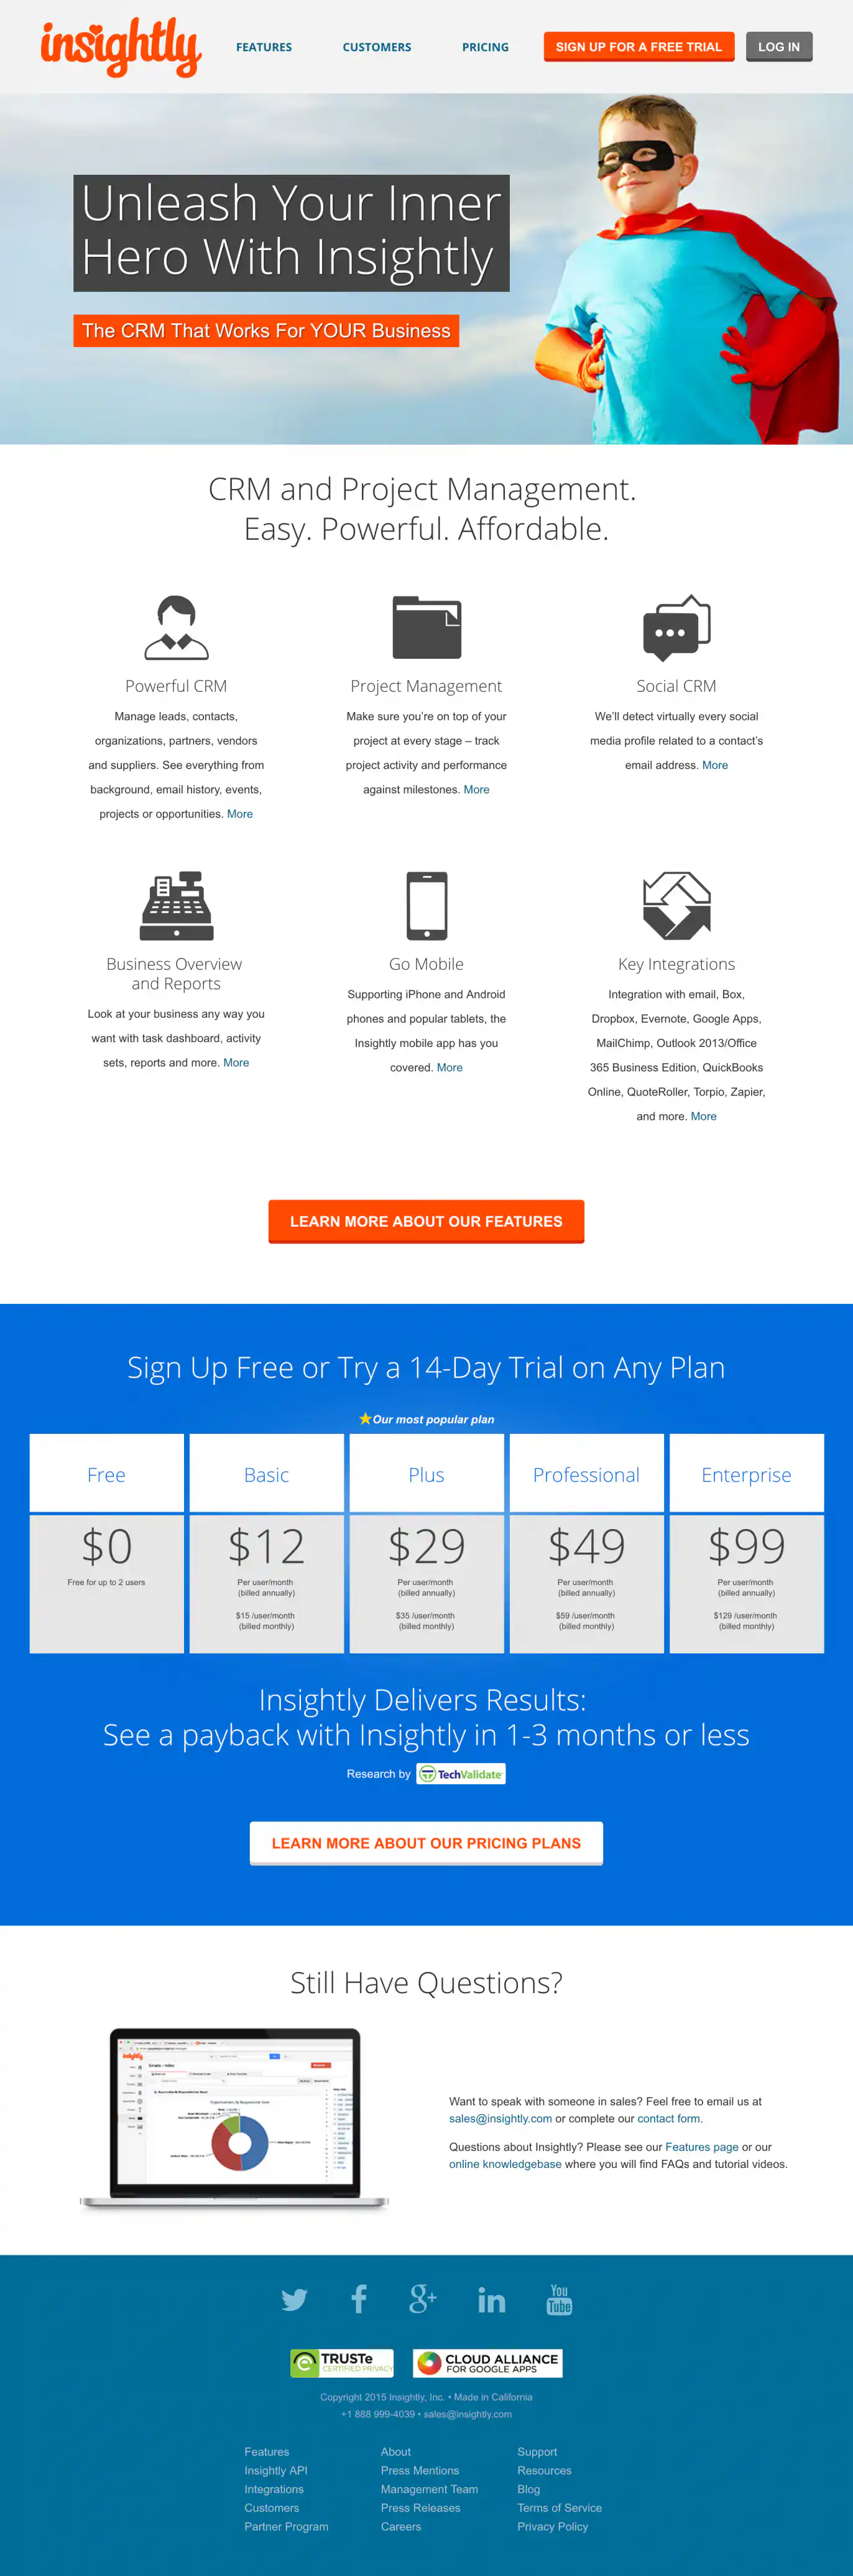 image showing version 6 homepage design from 2015